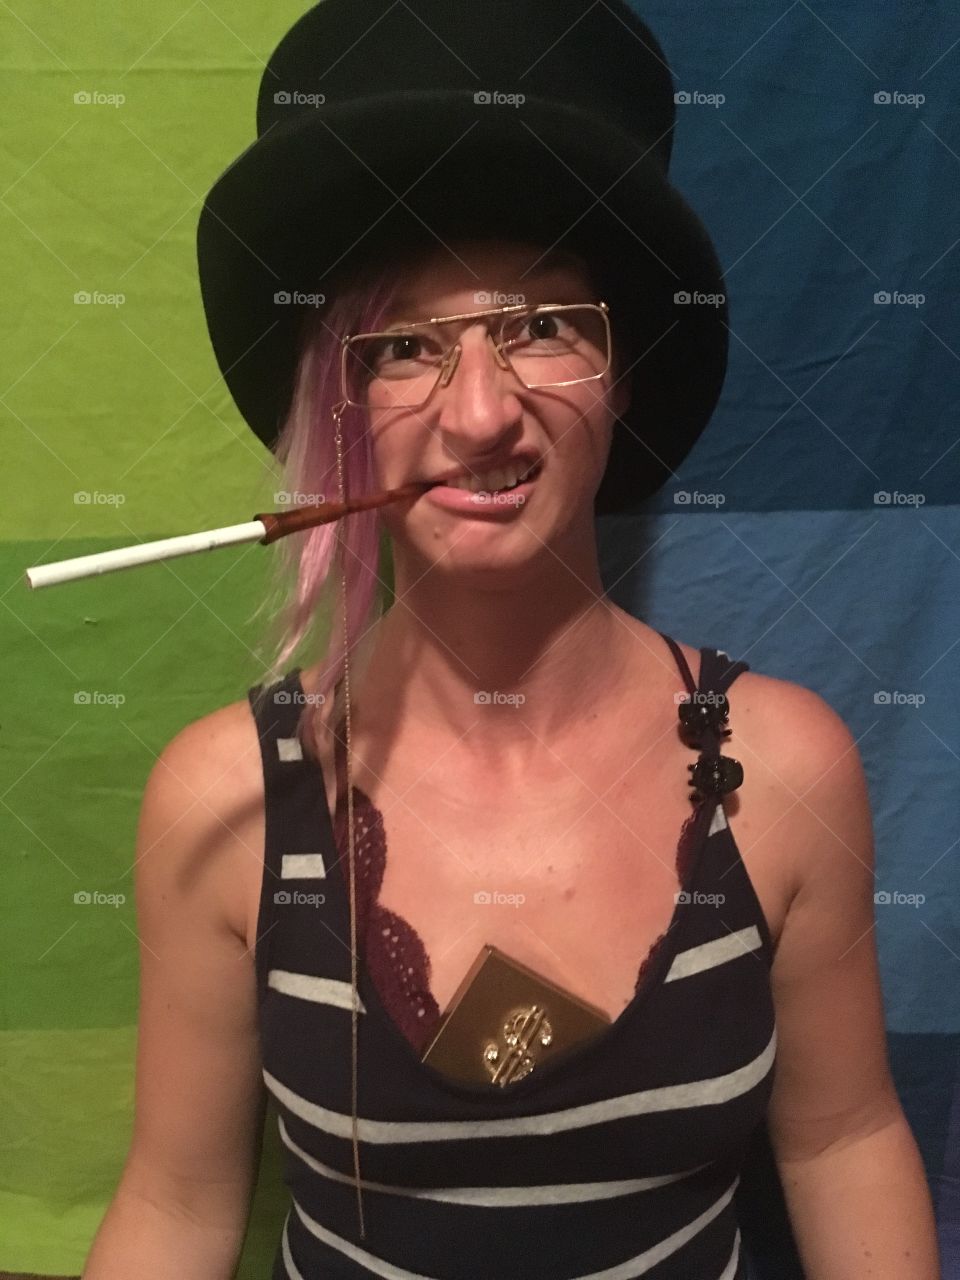 Woman making a silly snarling face with cigarette in a top hat and glasses in front of a colorful green and blue background